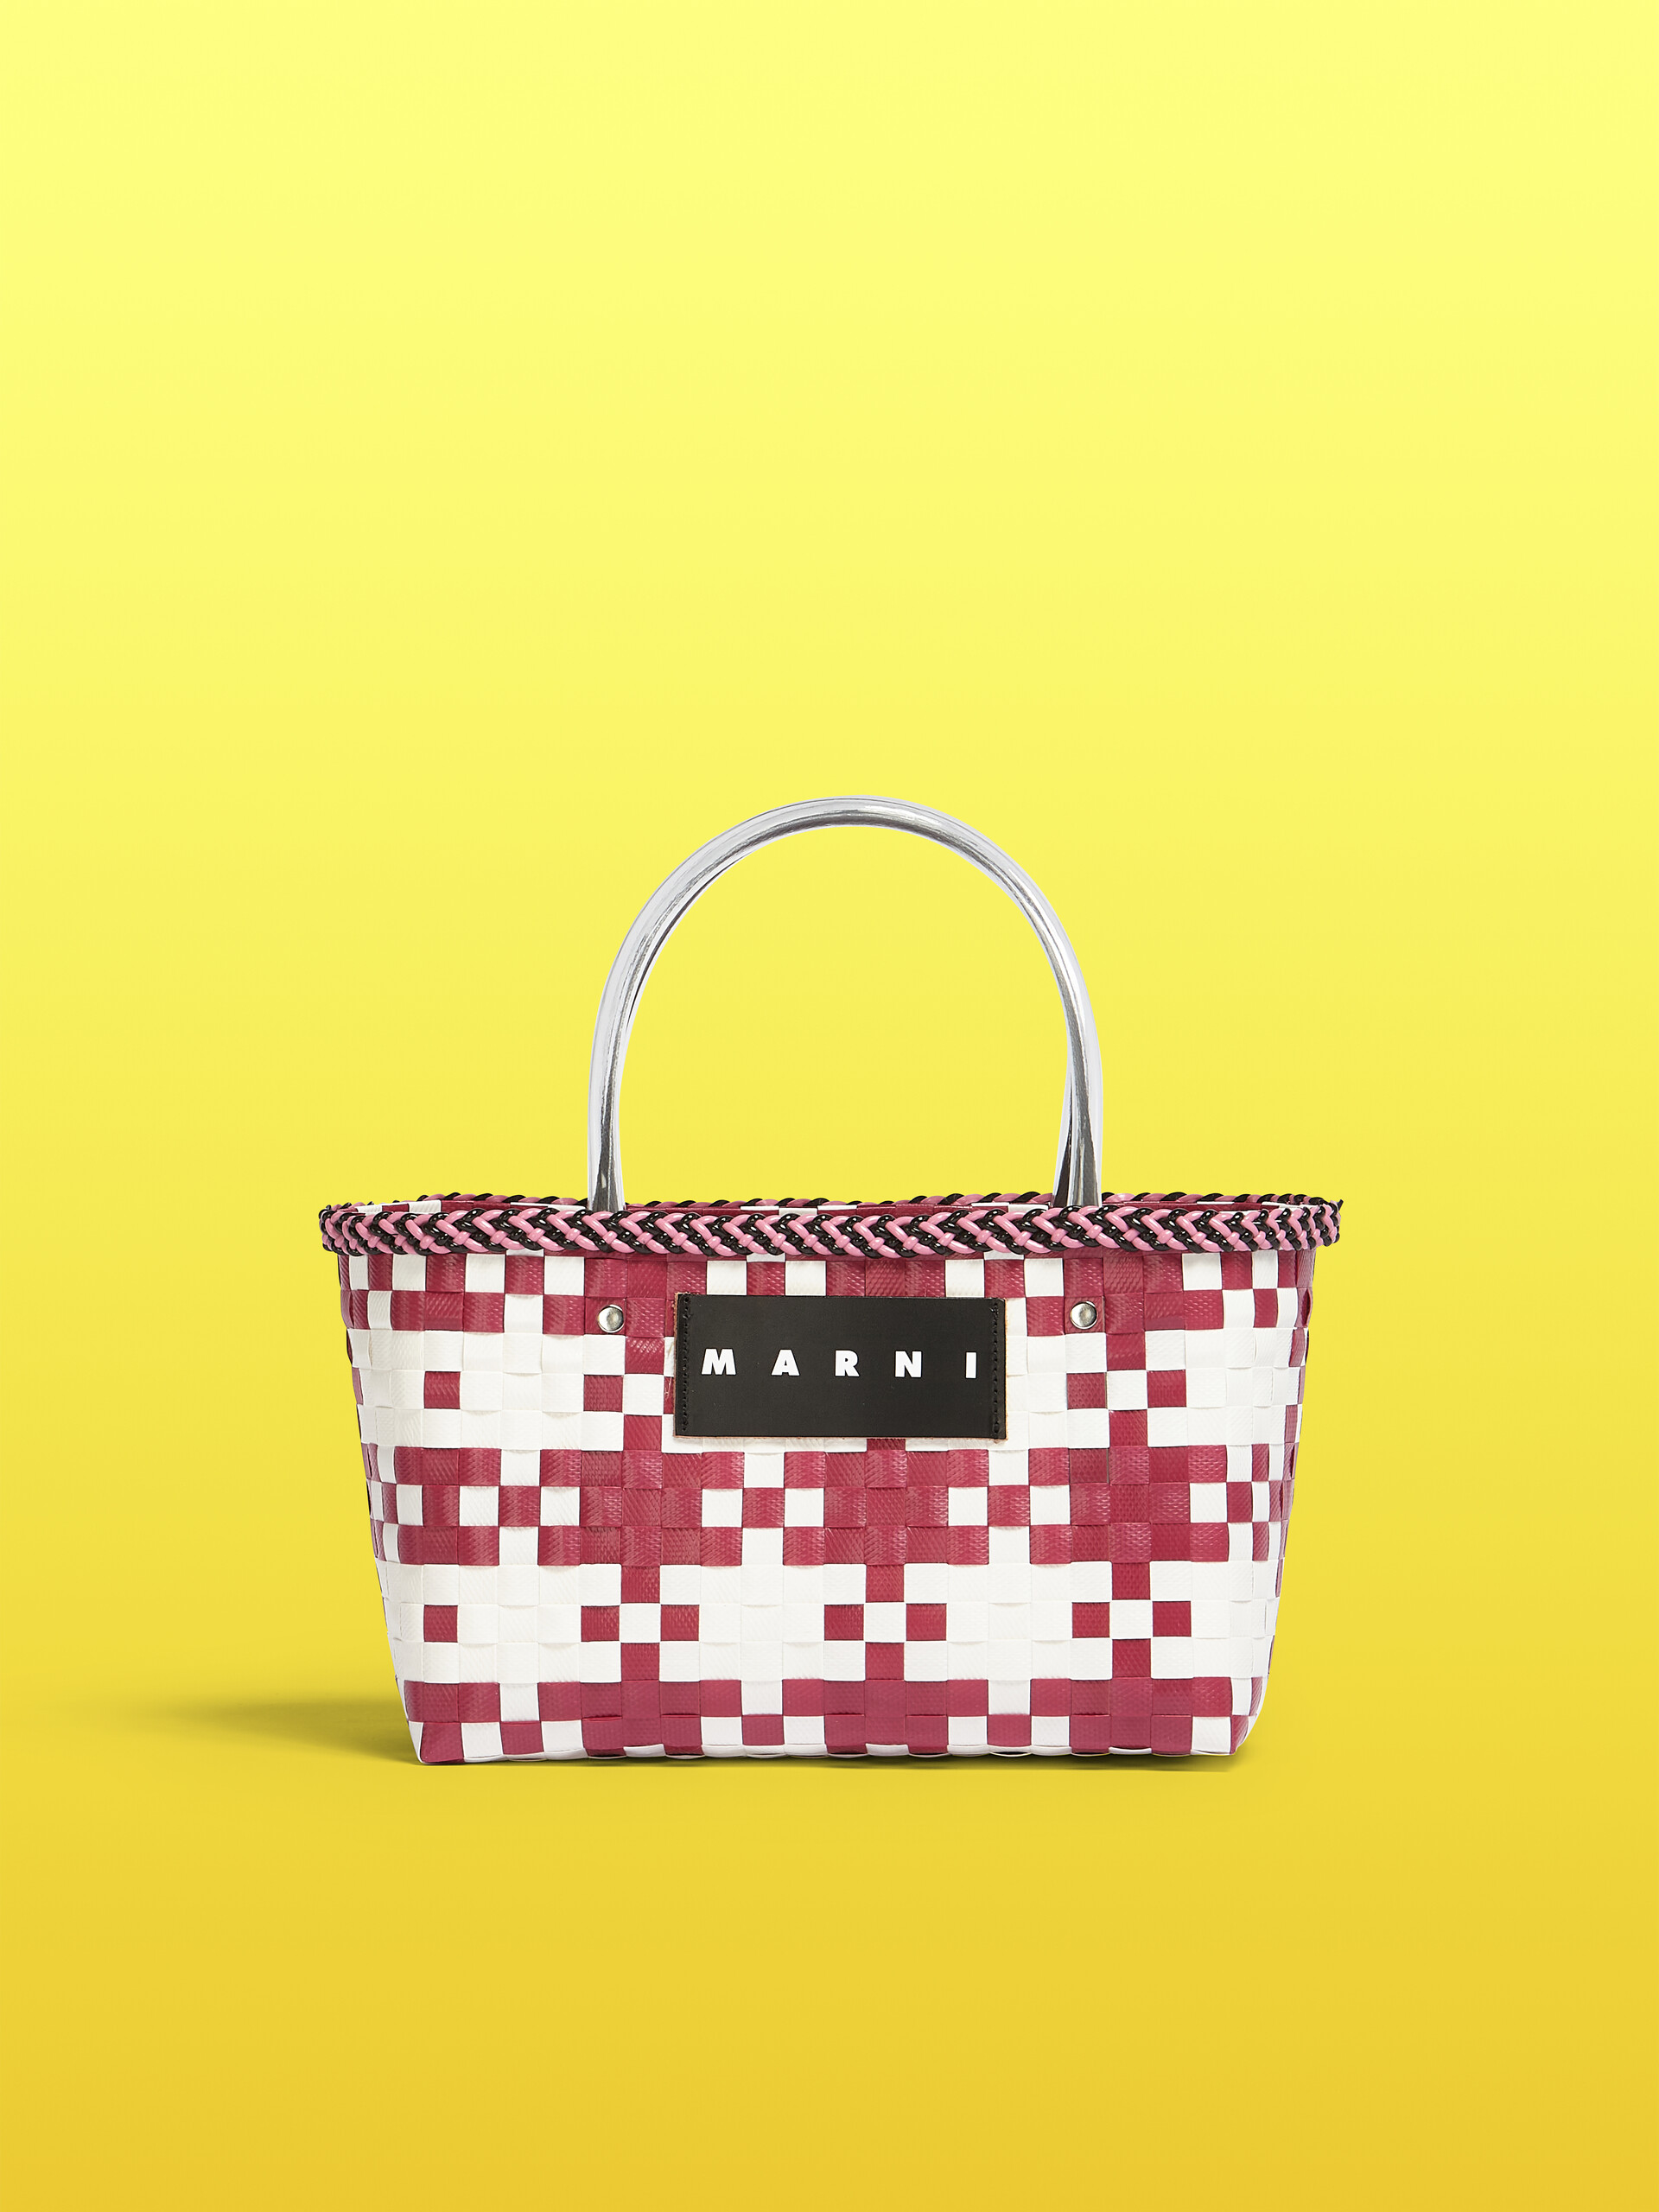 MARNI MARKET CHECK in red and white tartan woven material - Bags - Image 1